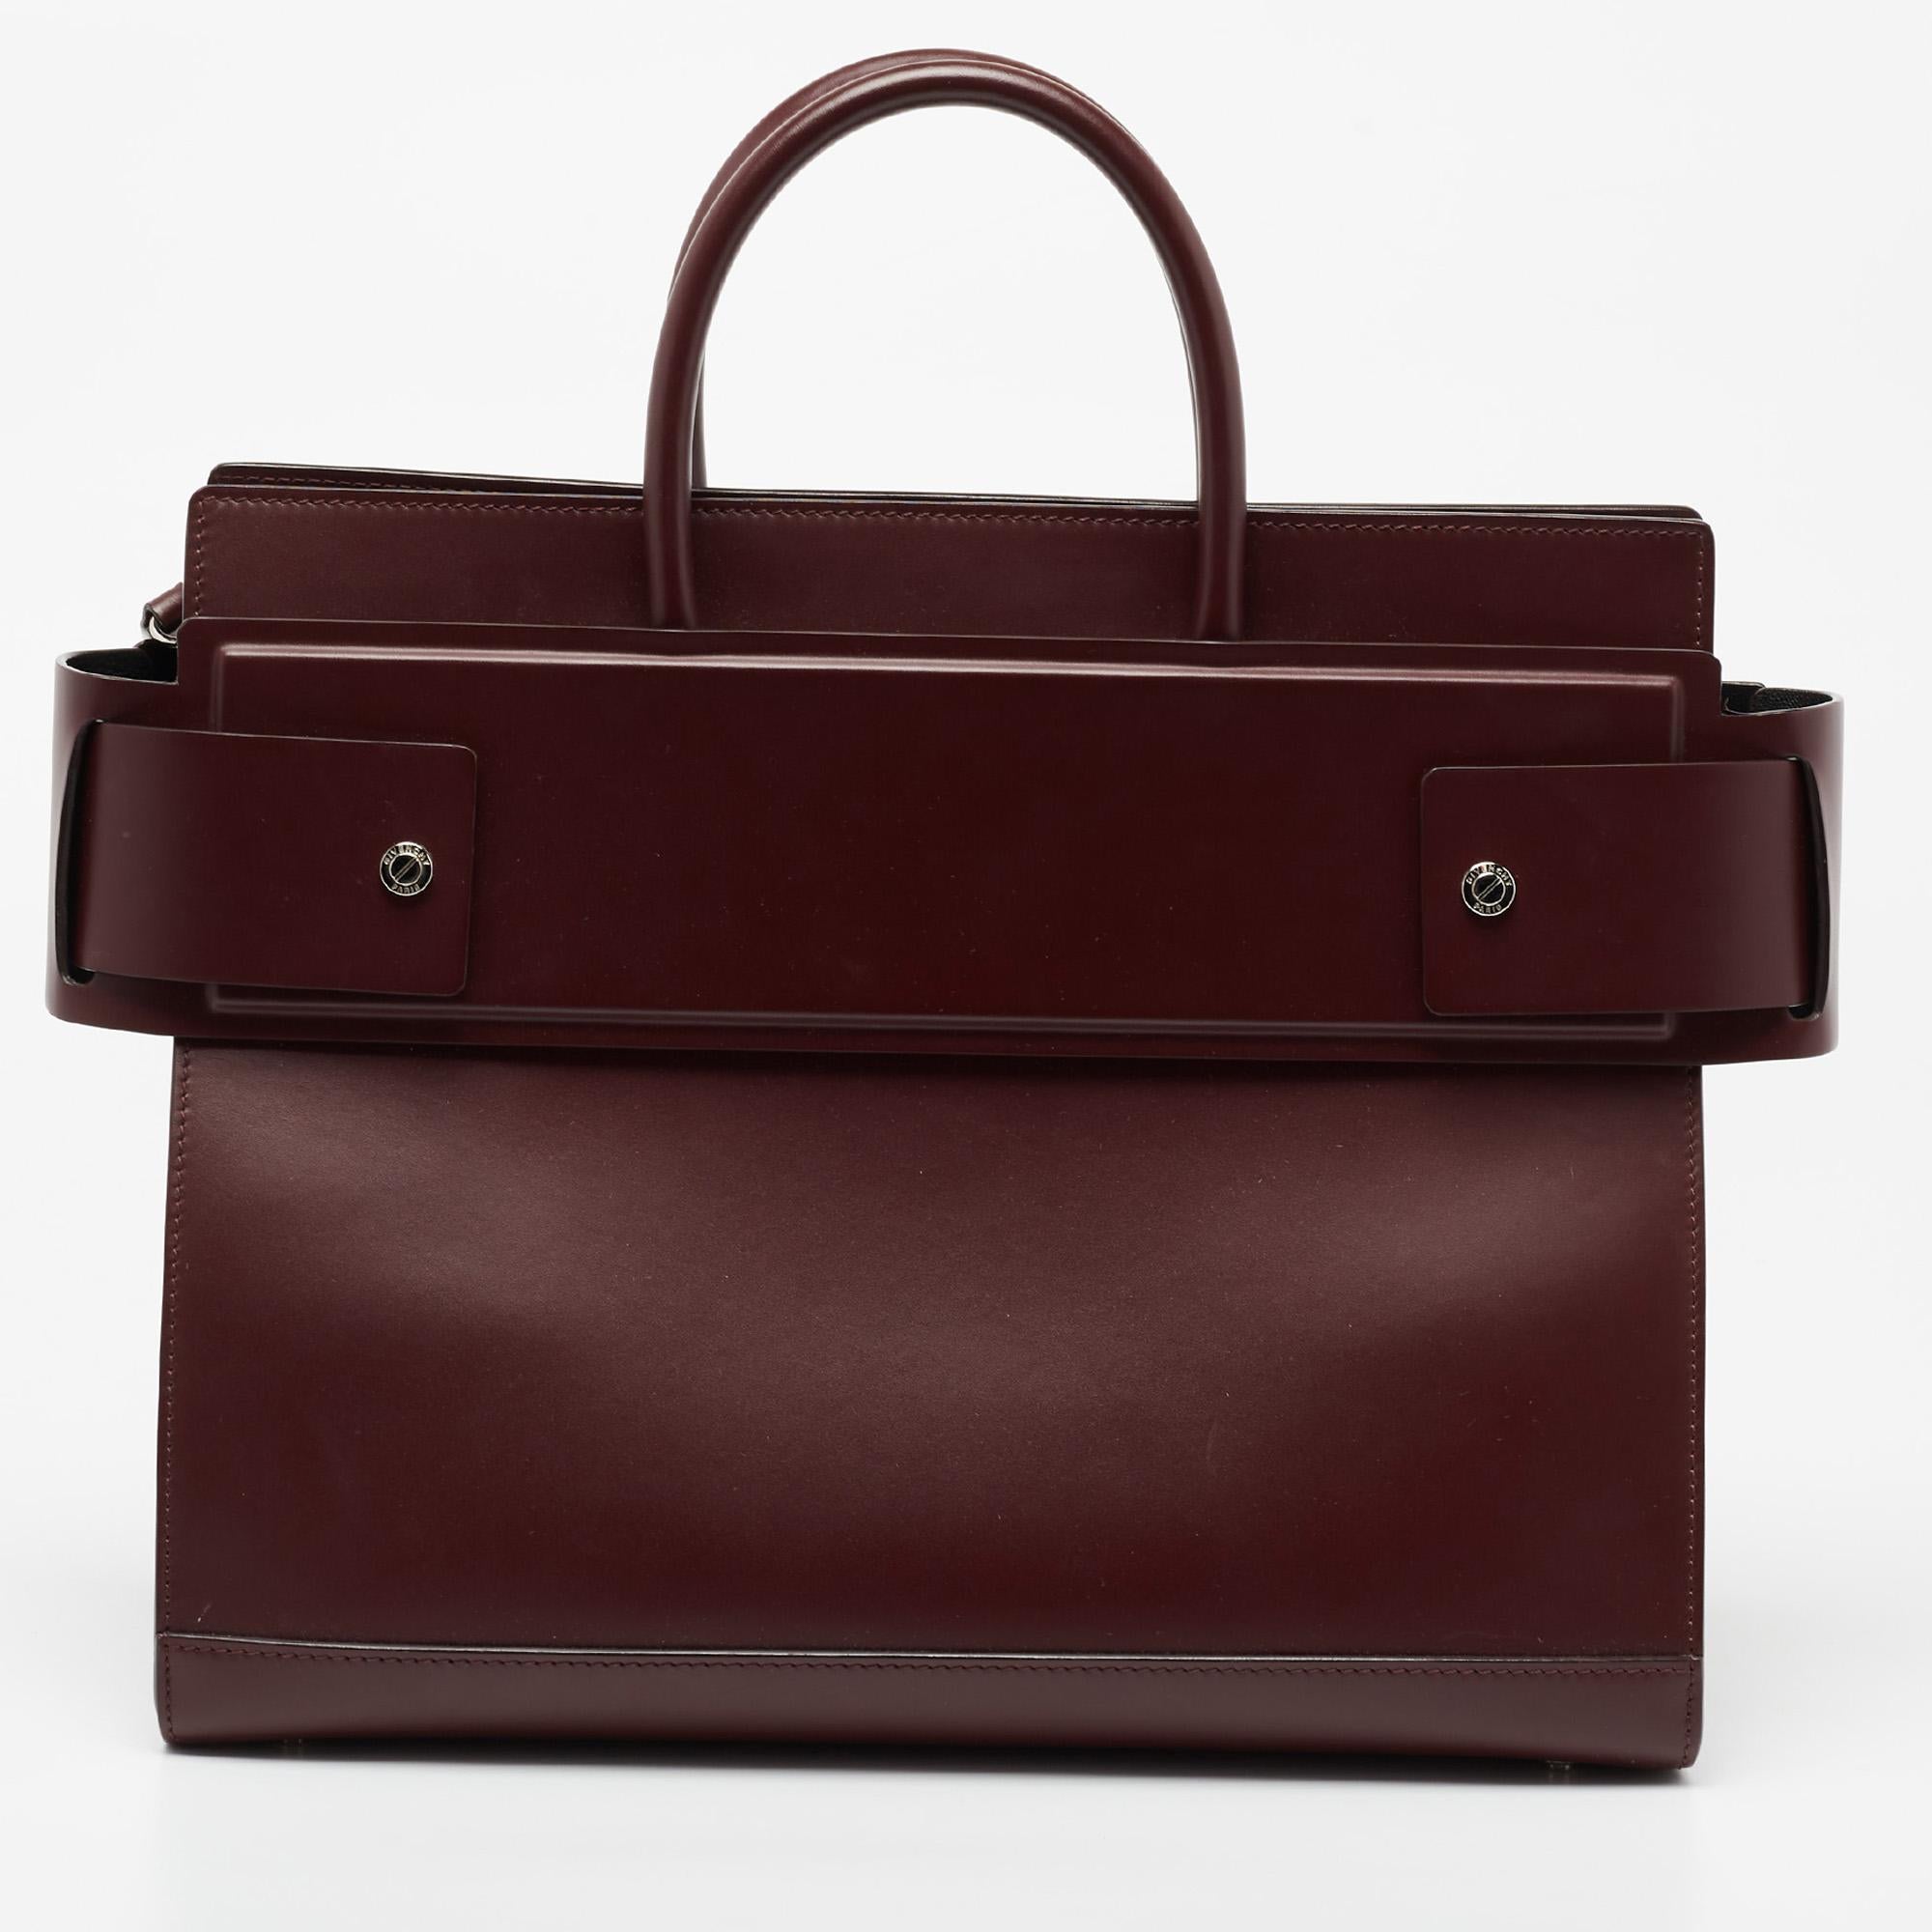 Givenchy is famed across the globe for its exquisite designs. From the brand's incredible collection comes this Horizon tote. Crafted from leather in a burgundy shade, the bag is aided by top handles and the label's logo stamped on the front. The